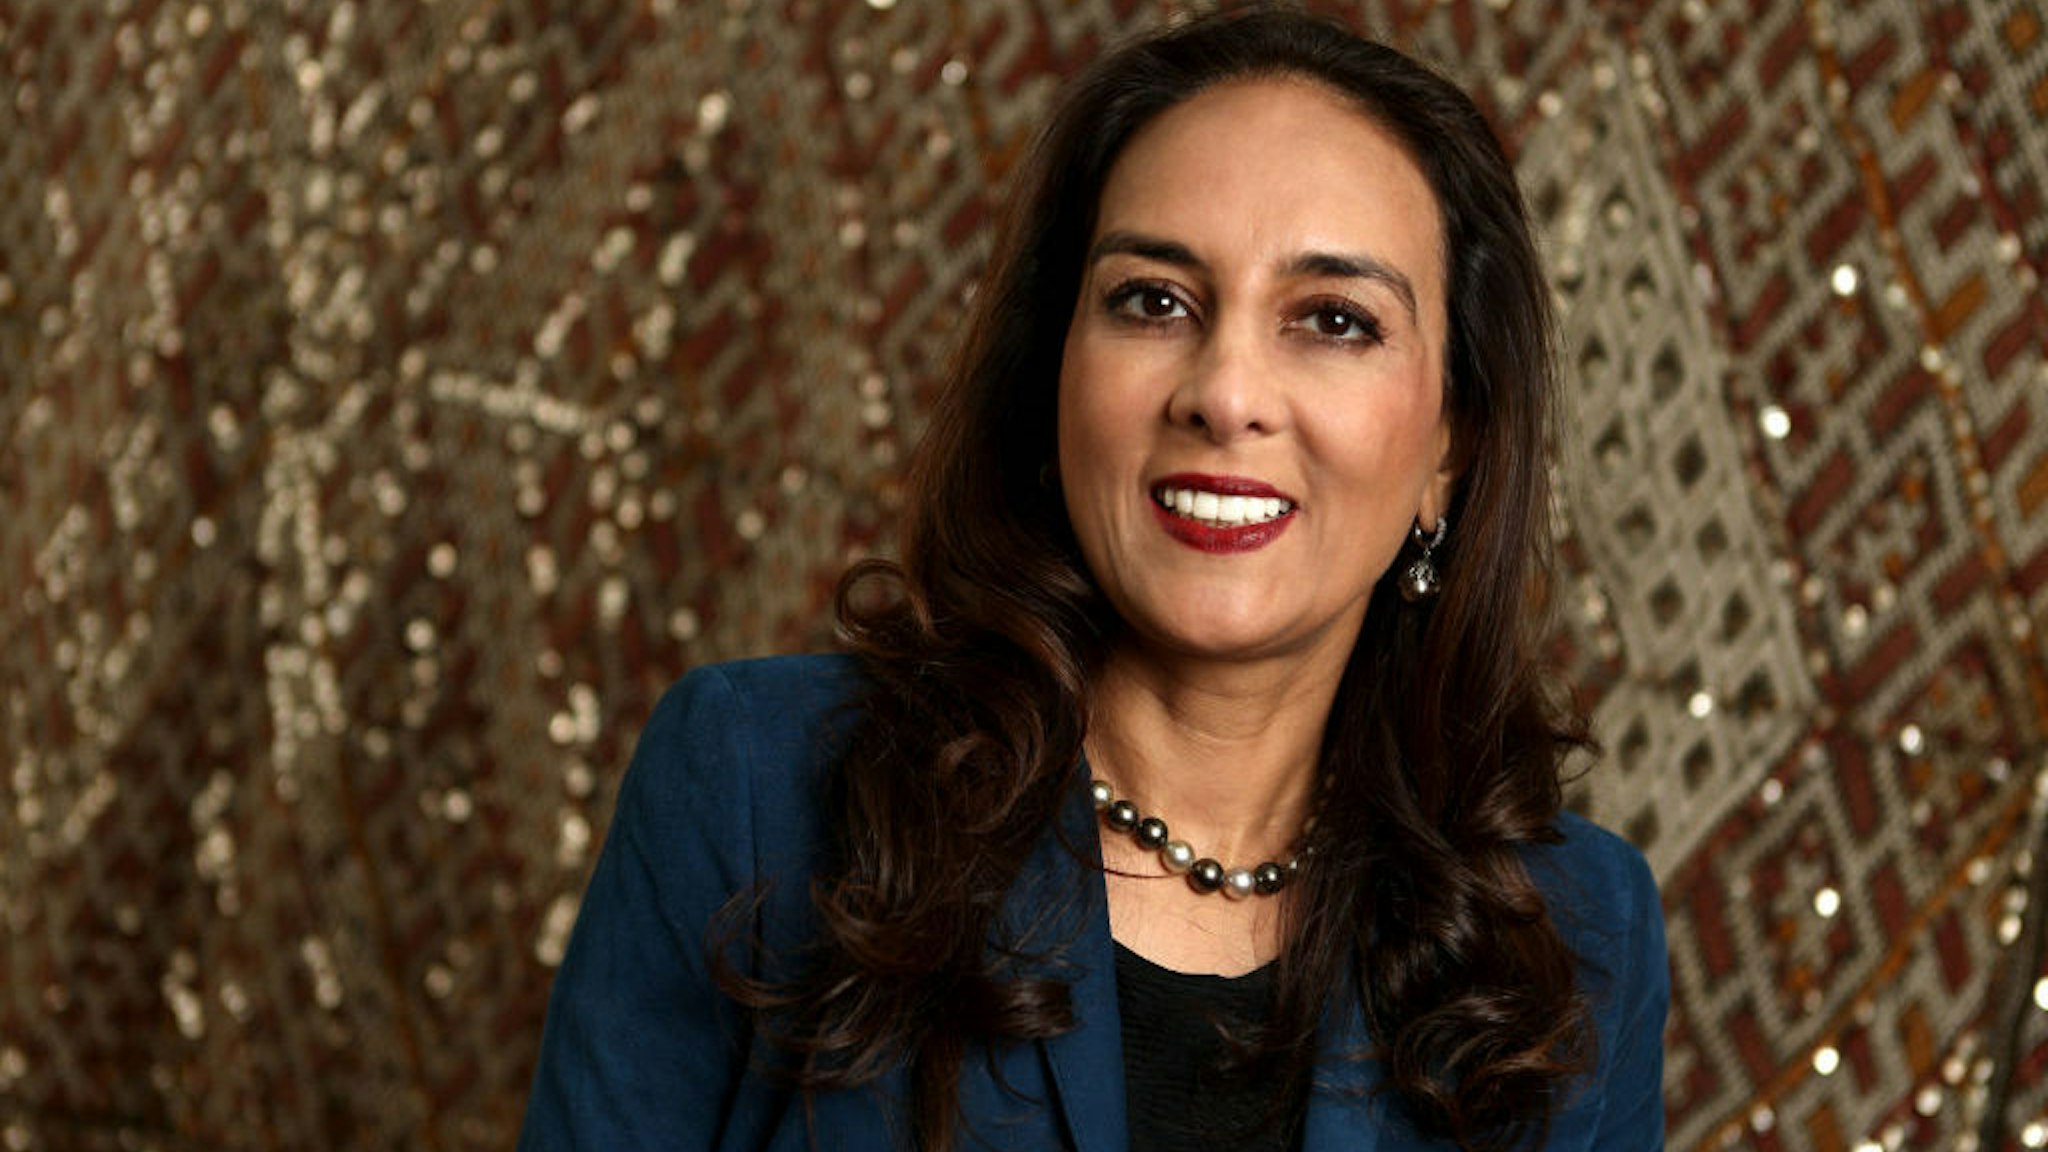 Attorney Harmeet Dhillon California's national committeewoman for the Republican National Committee poses for a photograph at her office in San Francisco, Calif., on Wednesday, Sept. 20, 2017. (Anda Chu/Bay Area News Group)